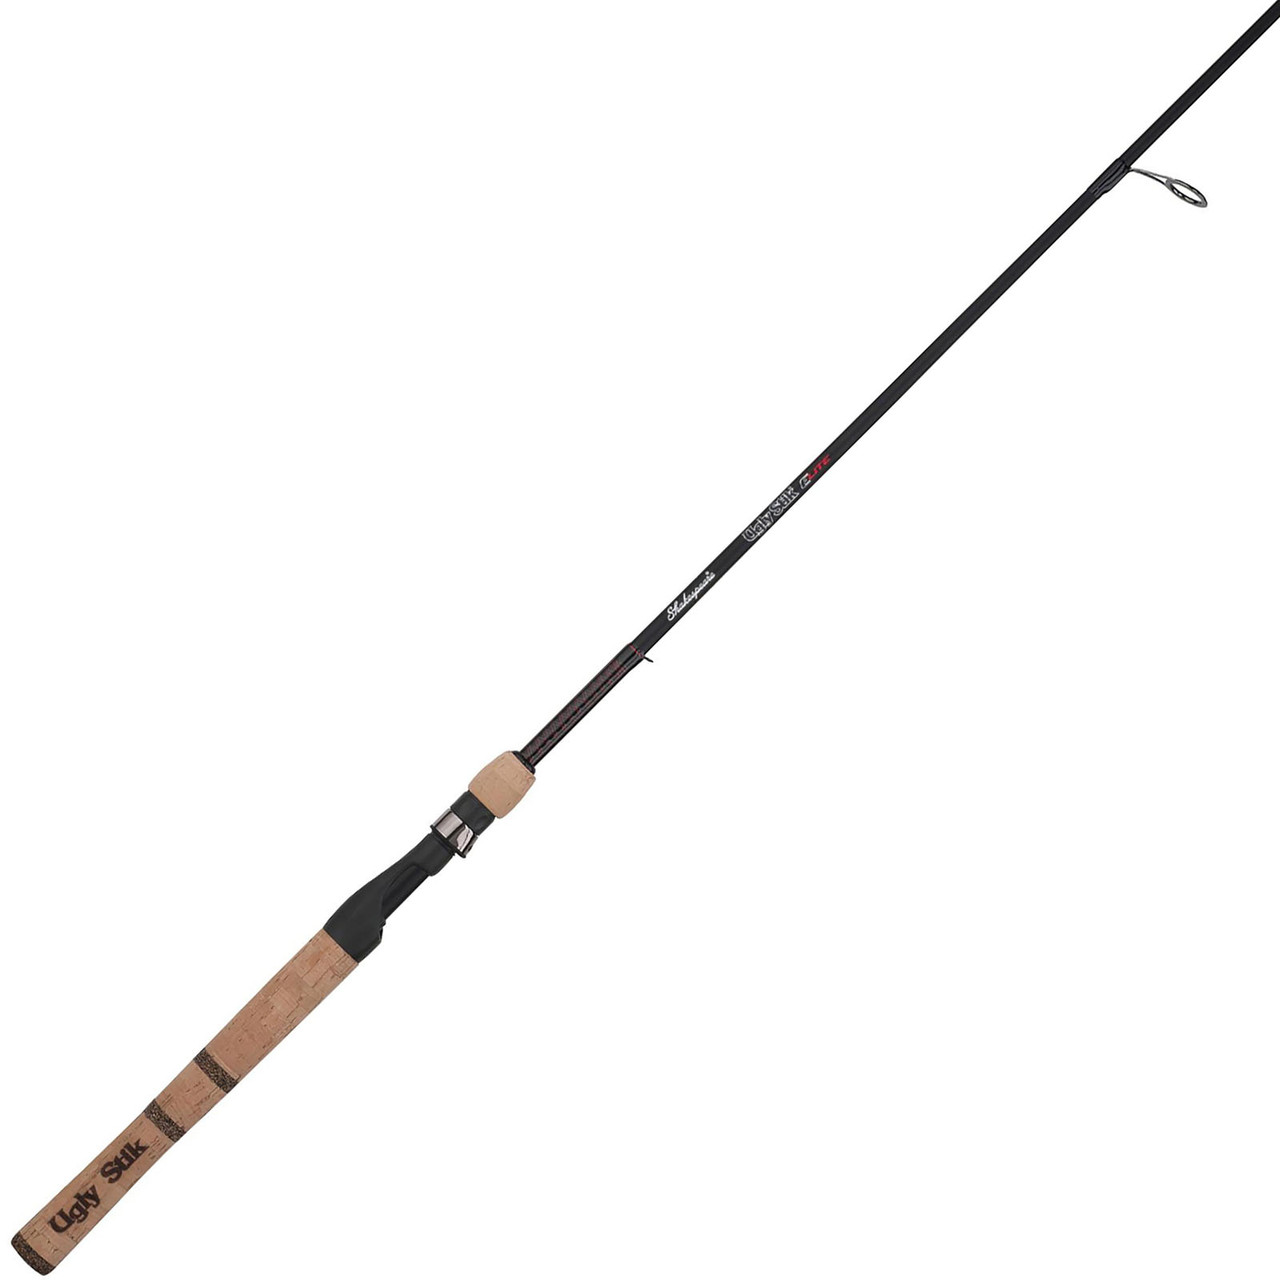 Shakespeare Ugly Stick GX2 Spinning Rod, 5 Ft, 6 Ft